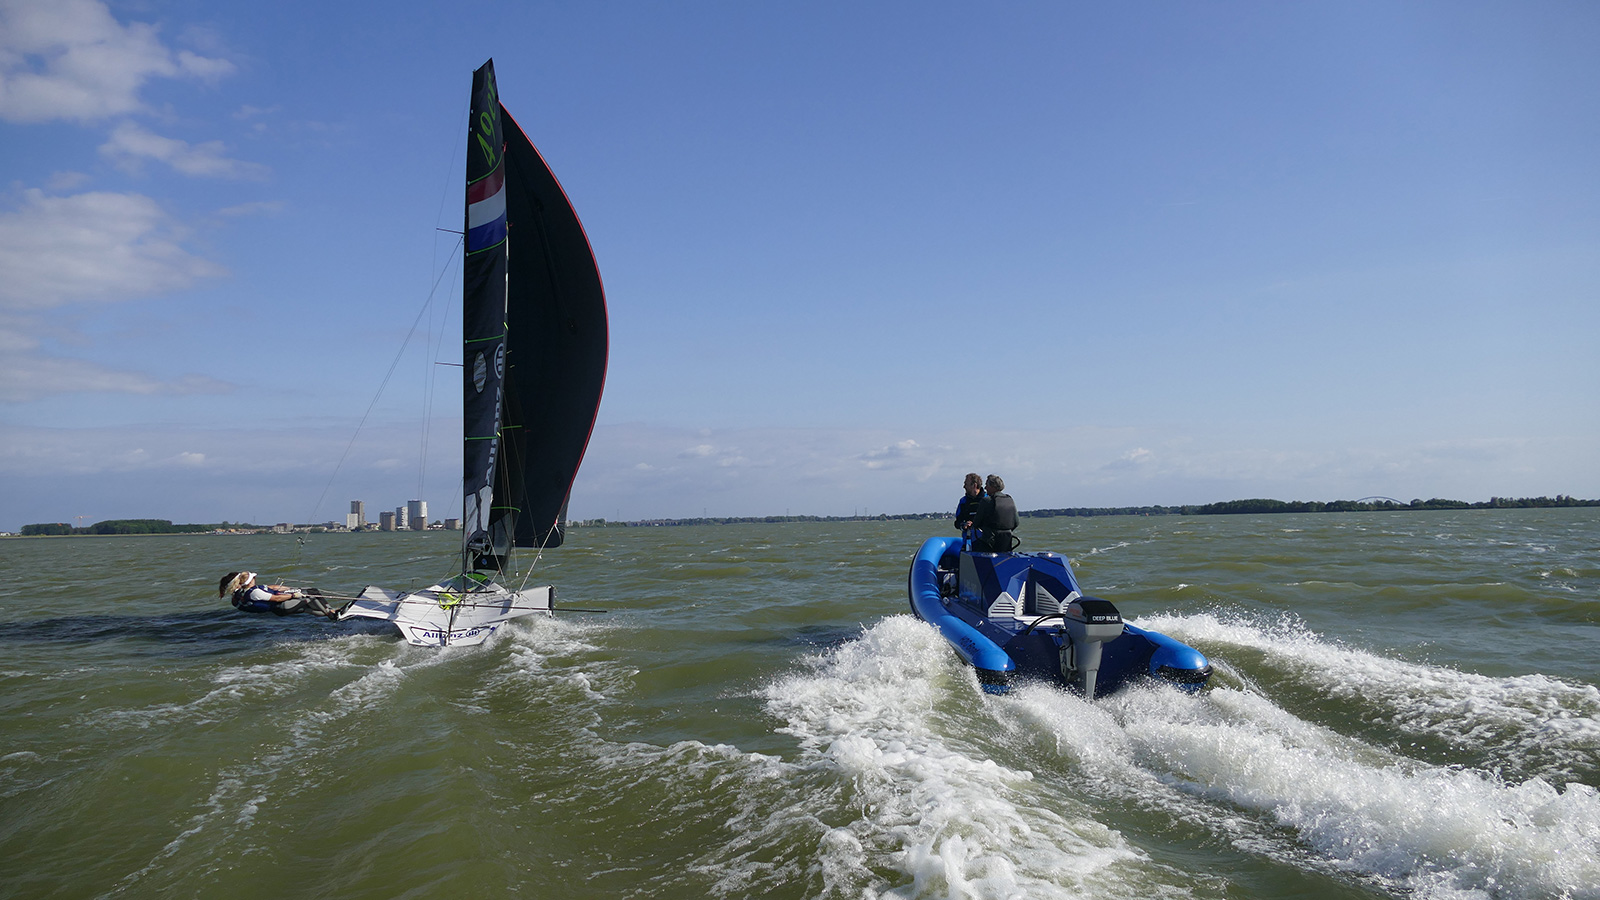 Torqeedo Blog - Zero emission Coach Boat for 2023 World Sailing  Championships - Electric mobility on the water